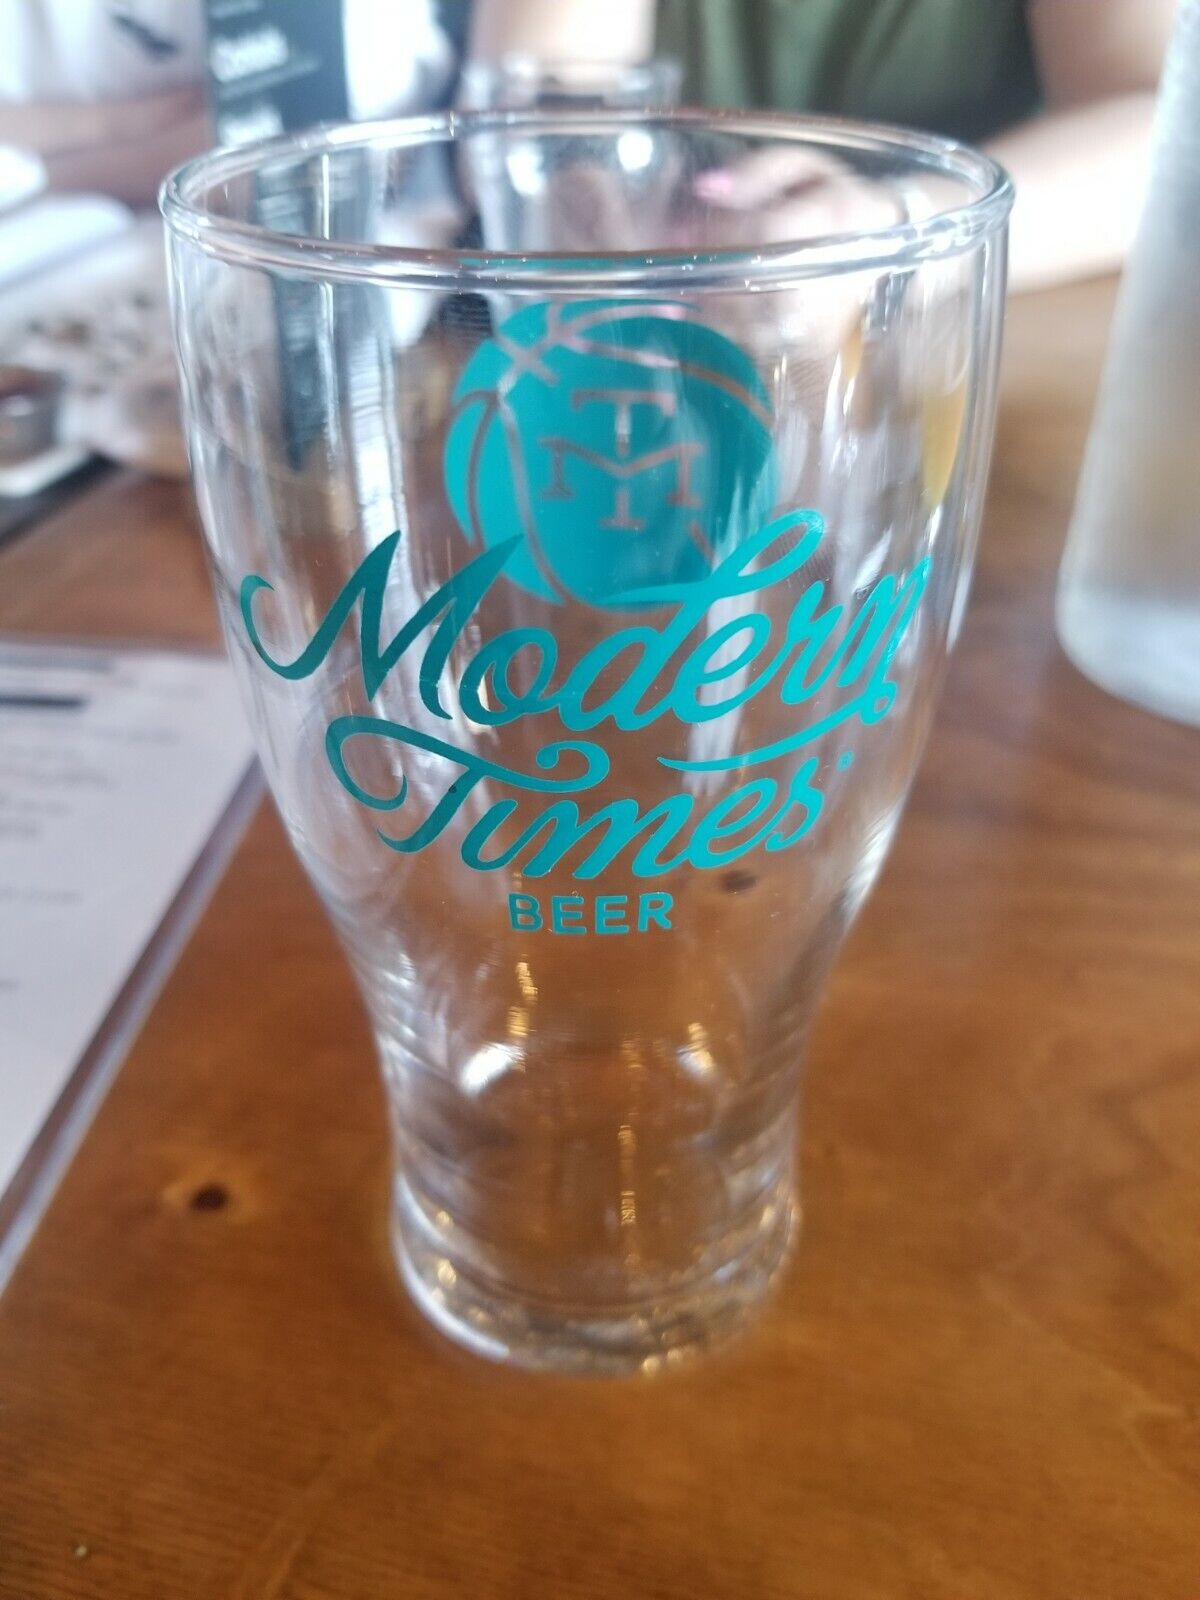 Modern Times Brewing NEW beer glass-san diego, CA brewery-March madness edition